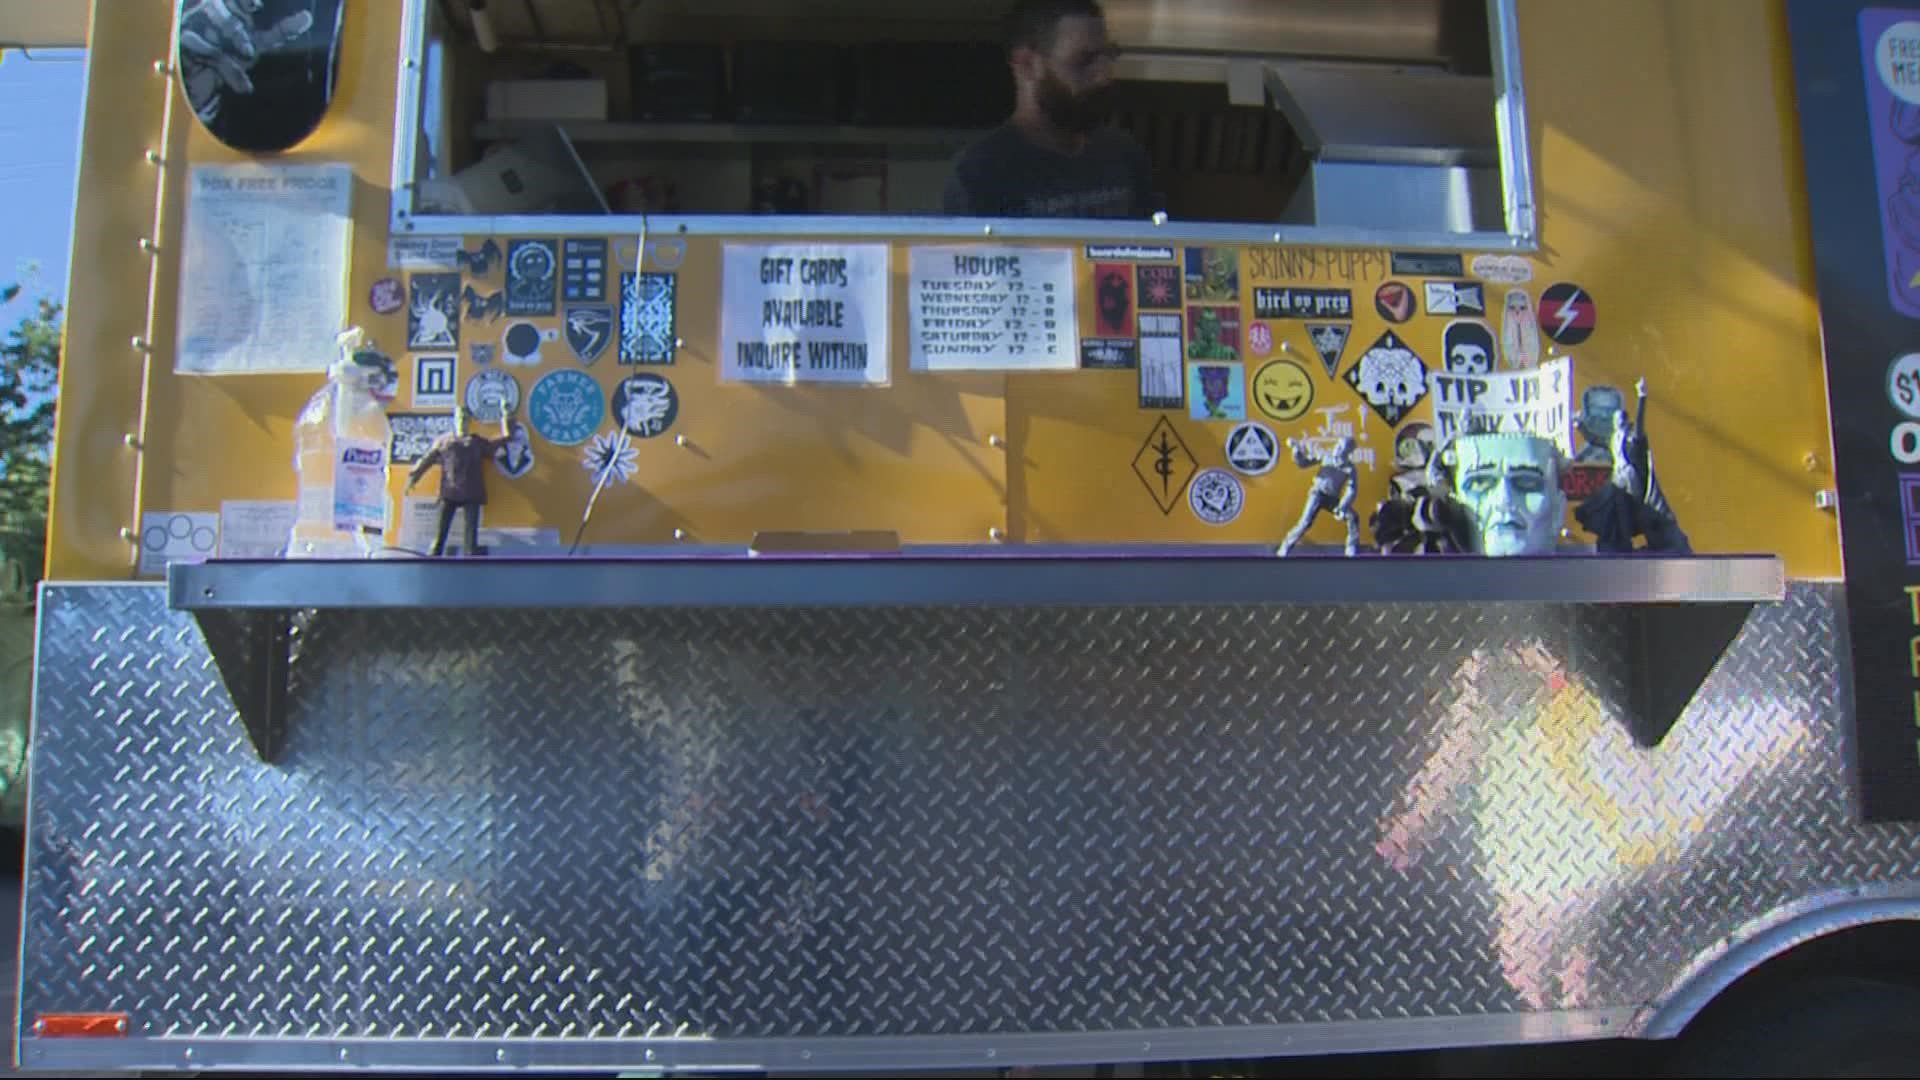 With temps expected to hit the triple digits in the coming week, food cart owners say they're drawing a line for worker and food safety.